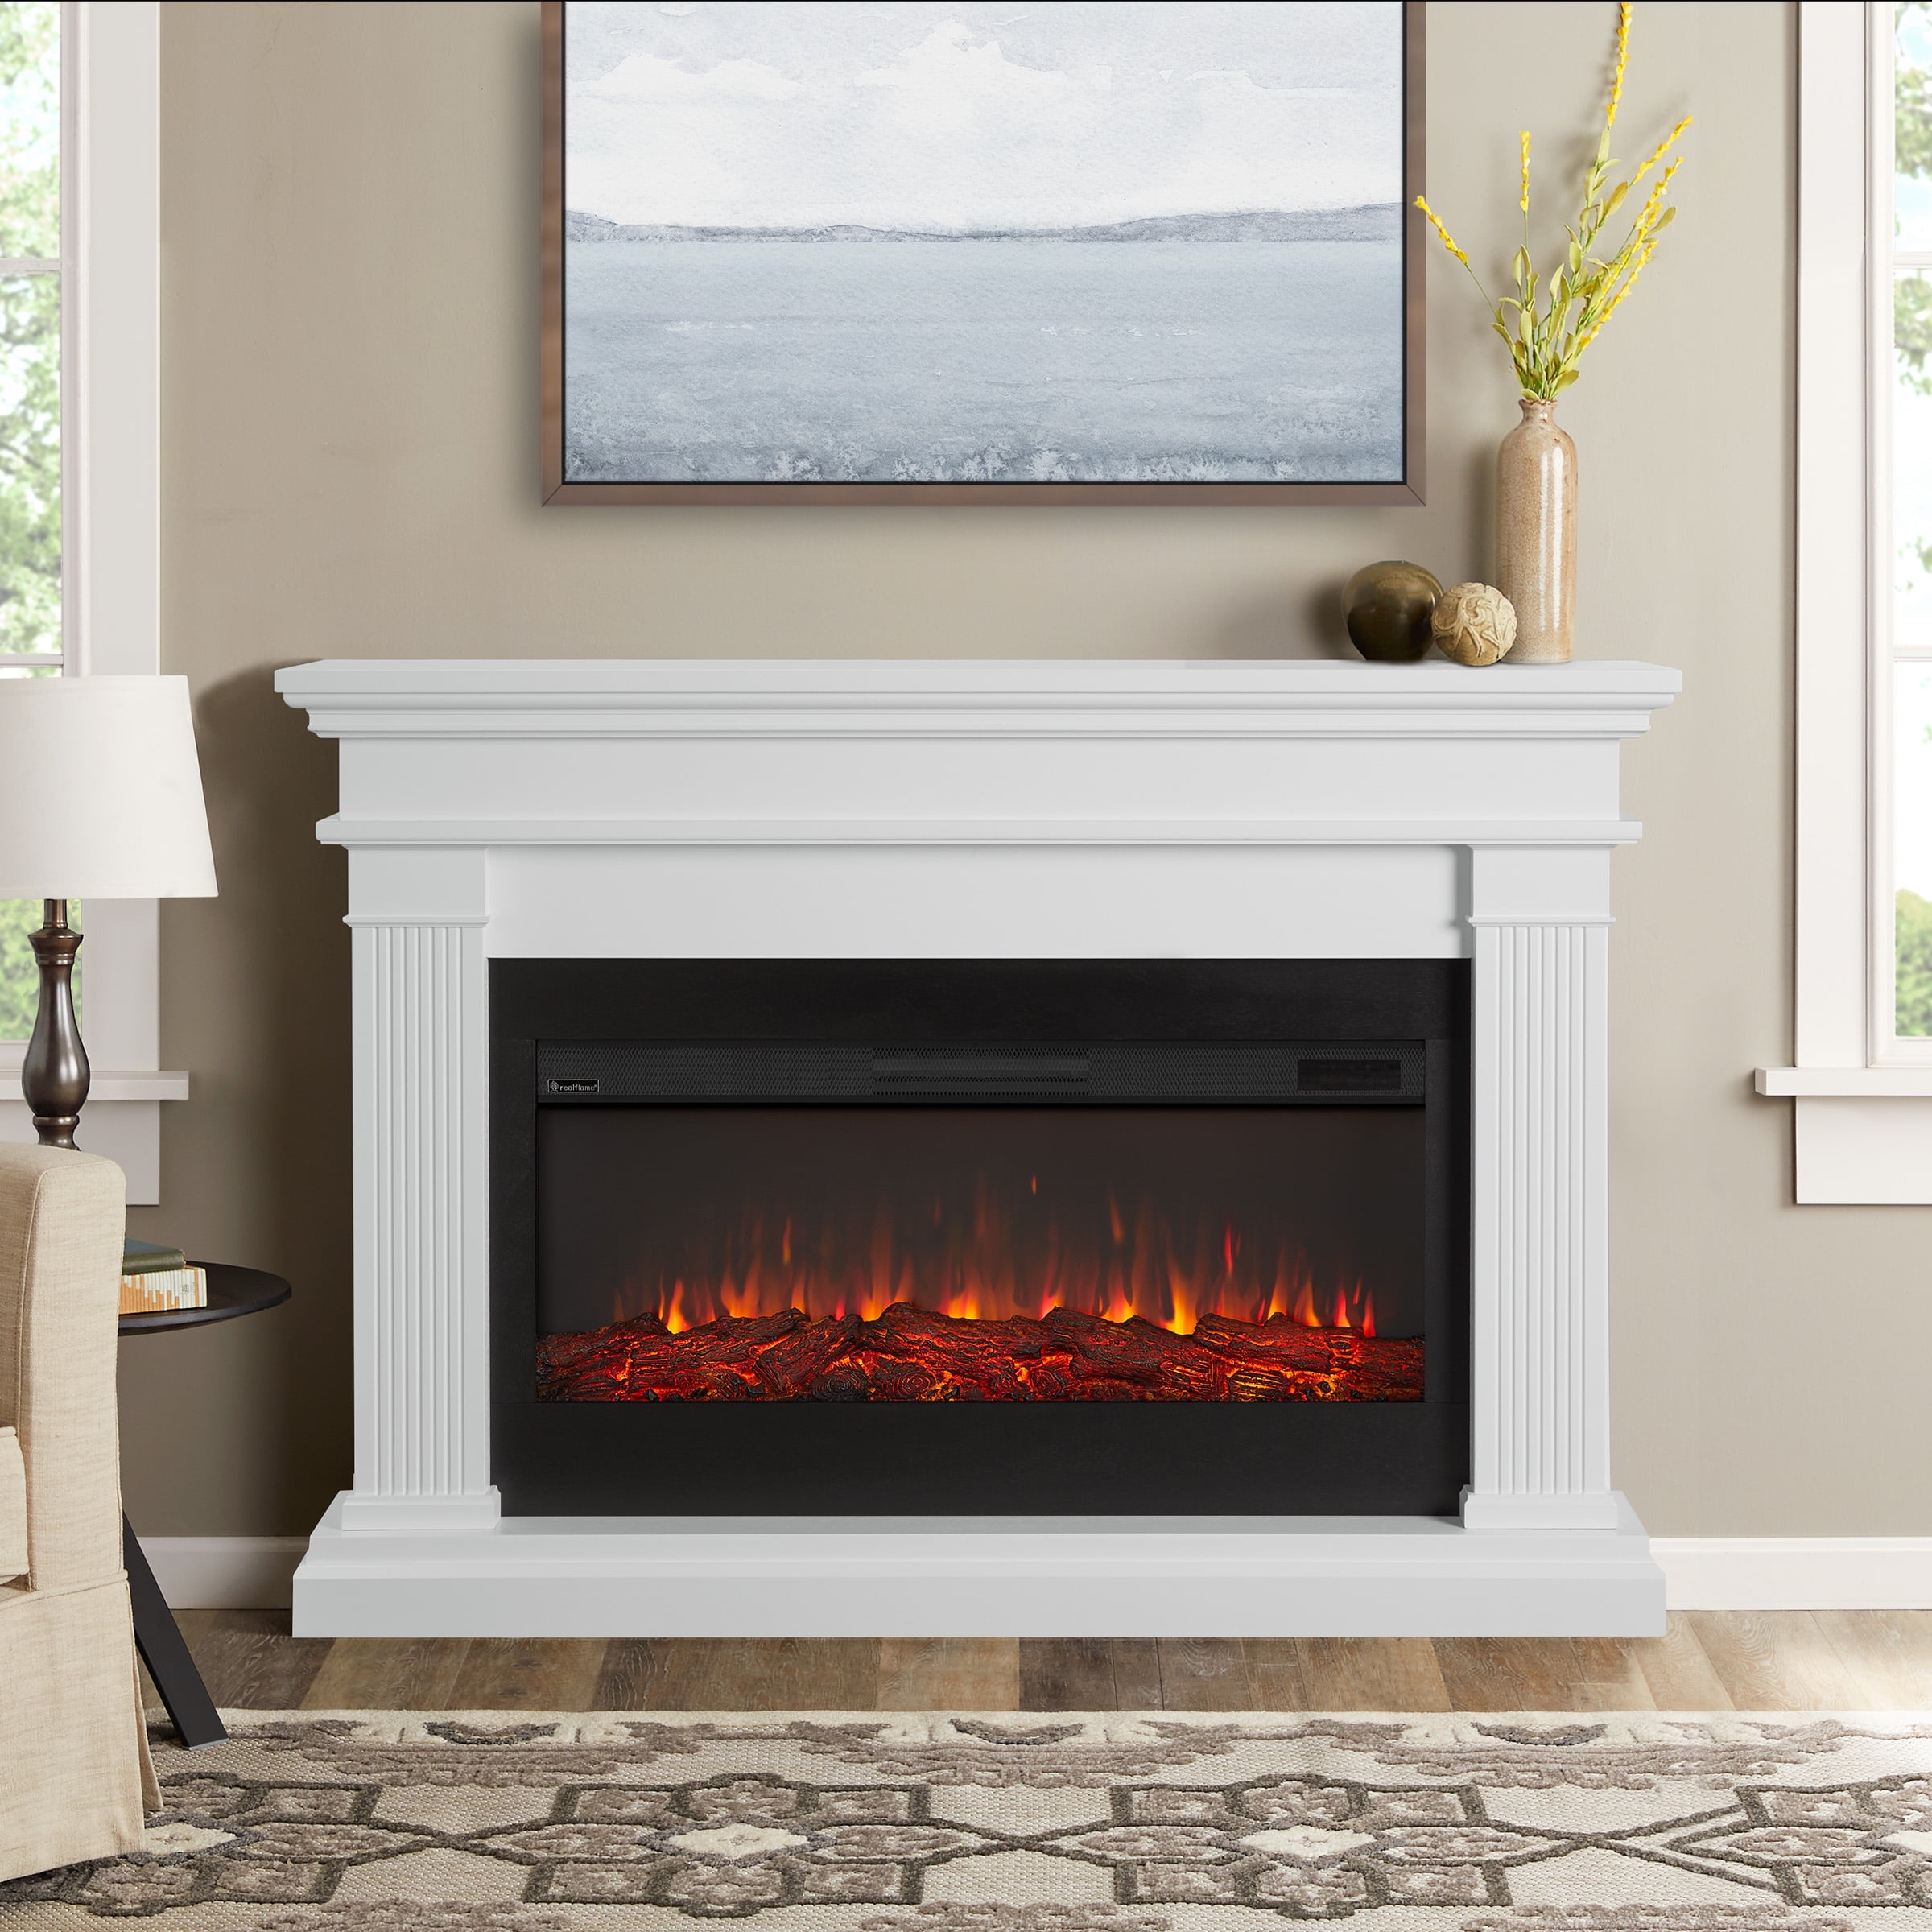 Beau Electric Fireplace In White By, Landscape Electric Fireplace